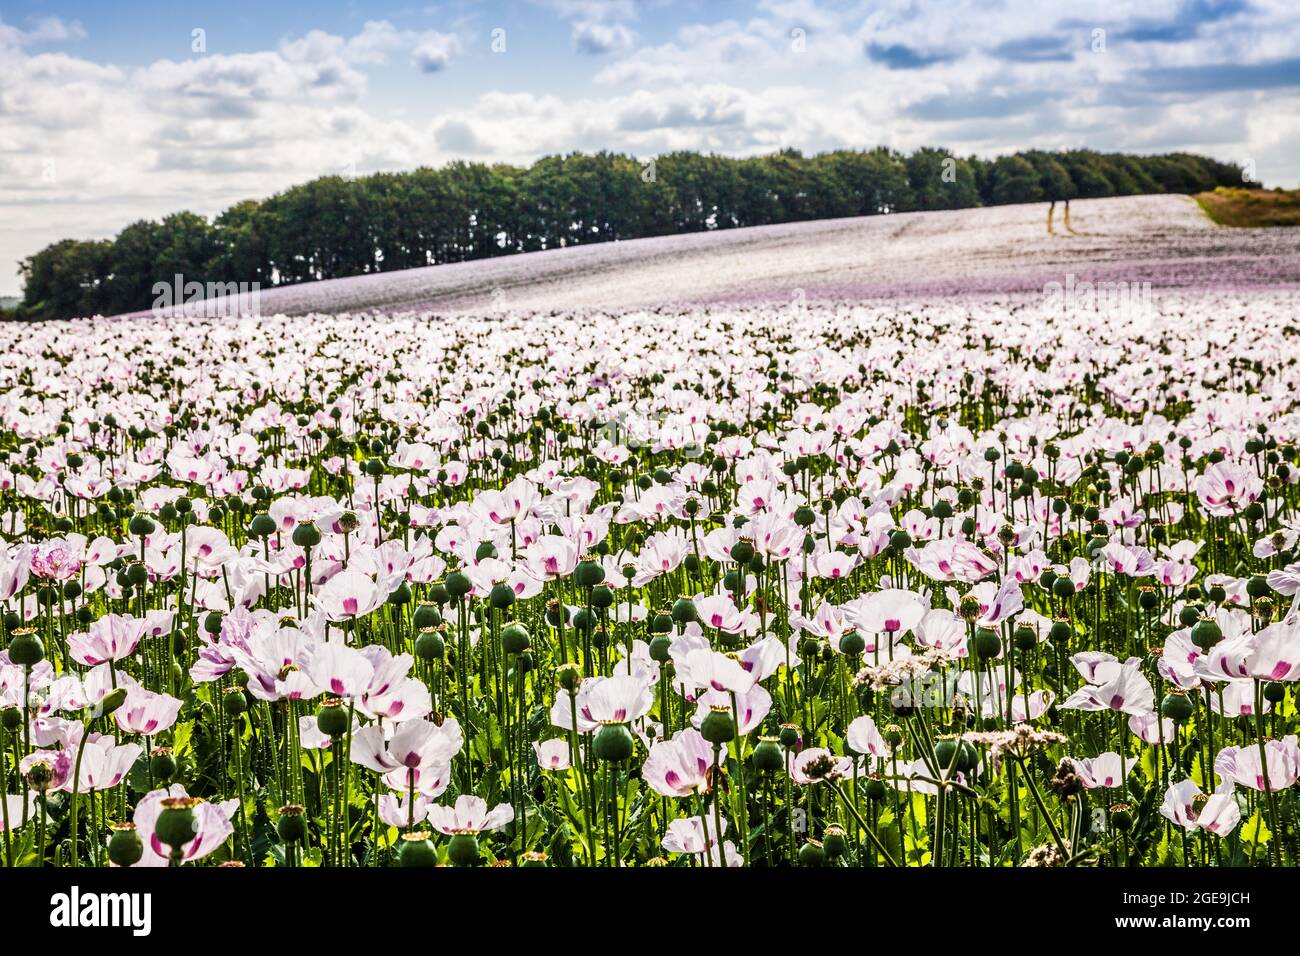 A field of cultivated white poppies on the Marlborough Downs in Wiltshire. Stock Photo